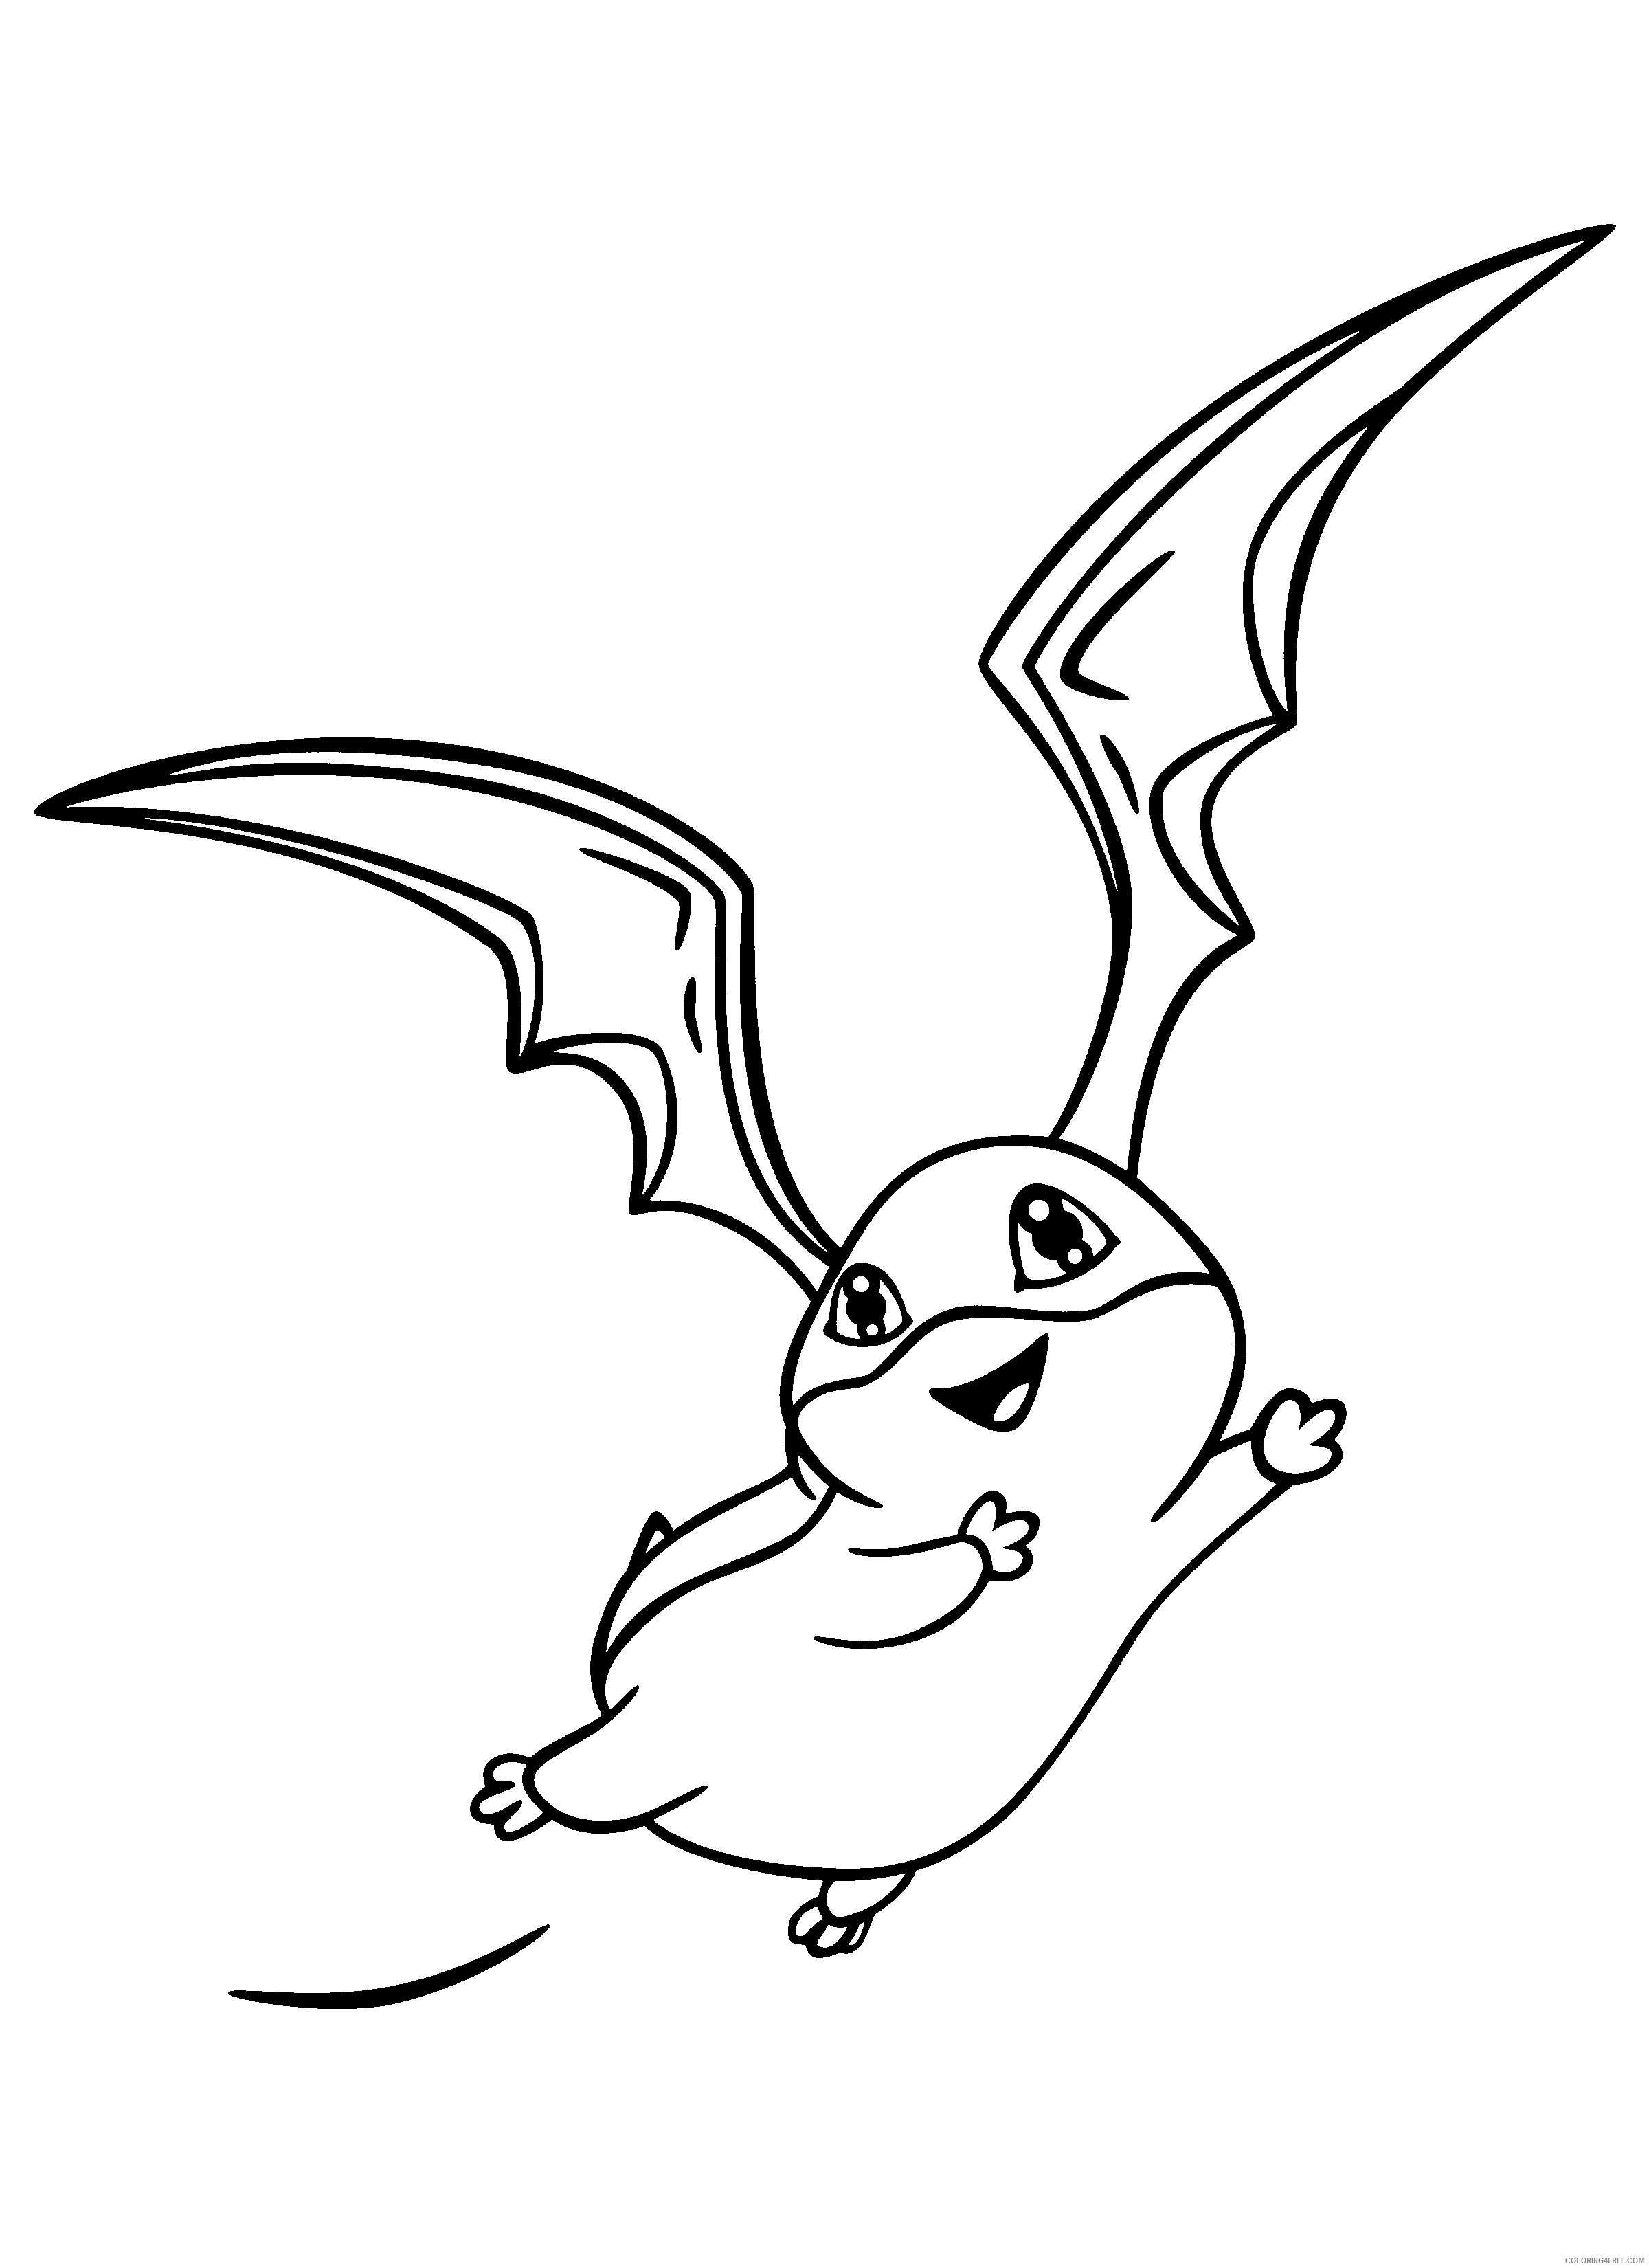 Digimon Printable Coloring Pages Anime digimon 176 2021 0265 Coloring4free